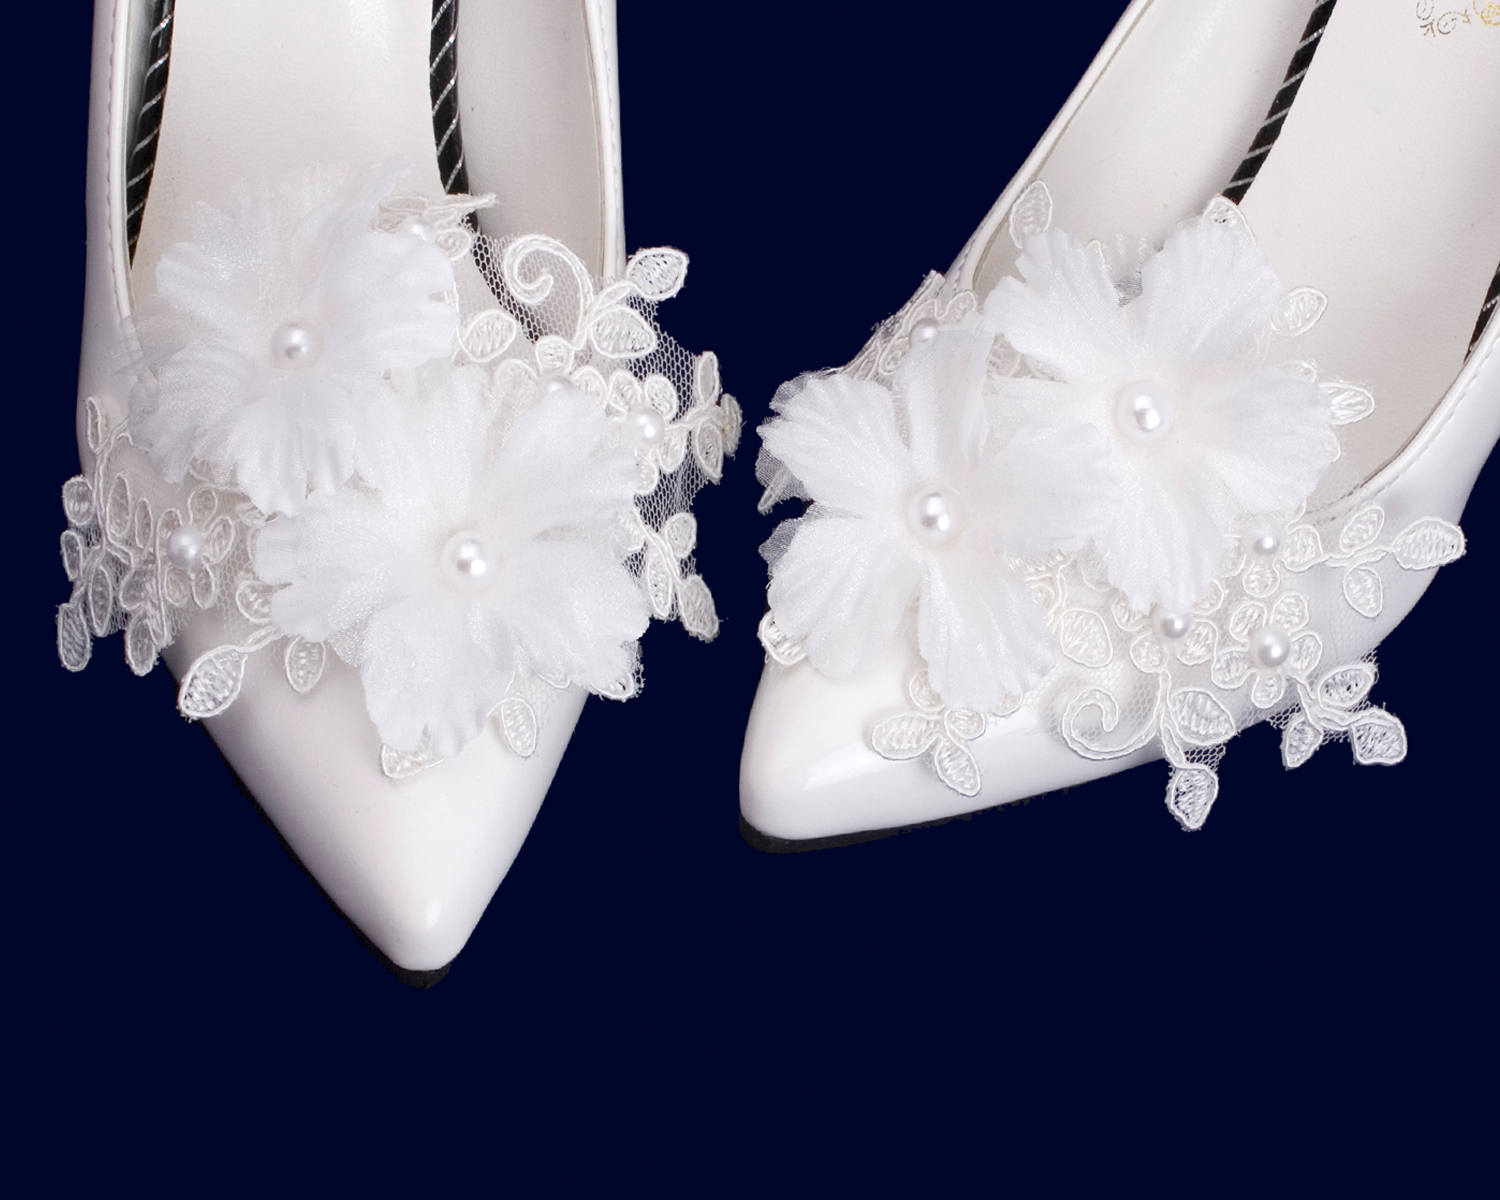 Pin on Bridal Shoes